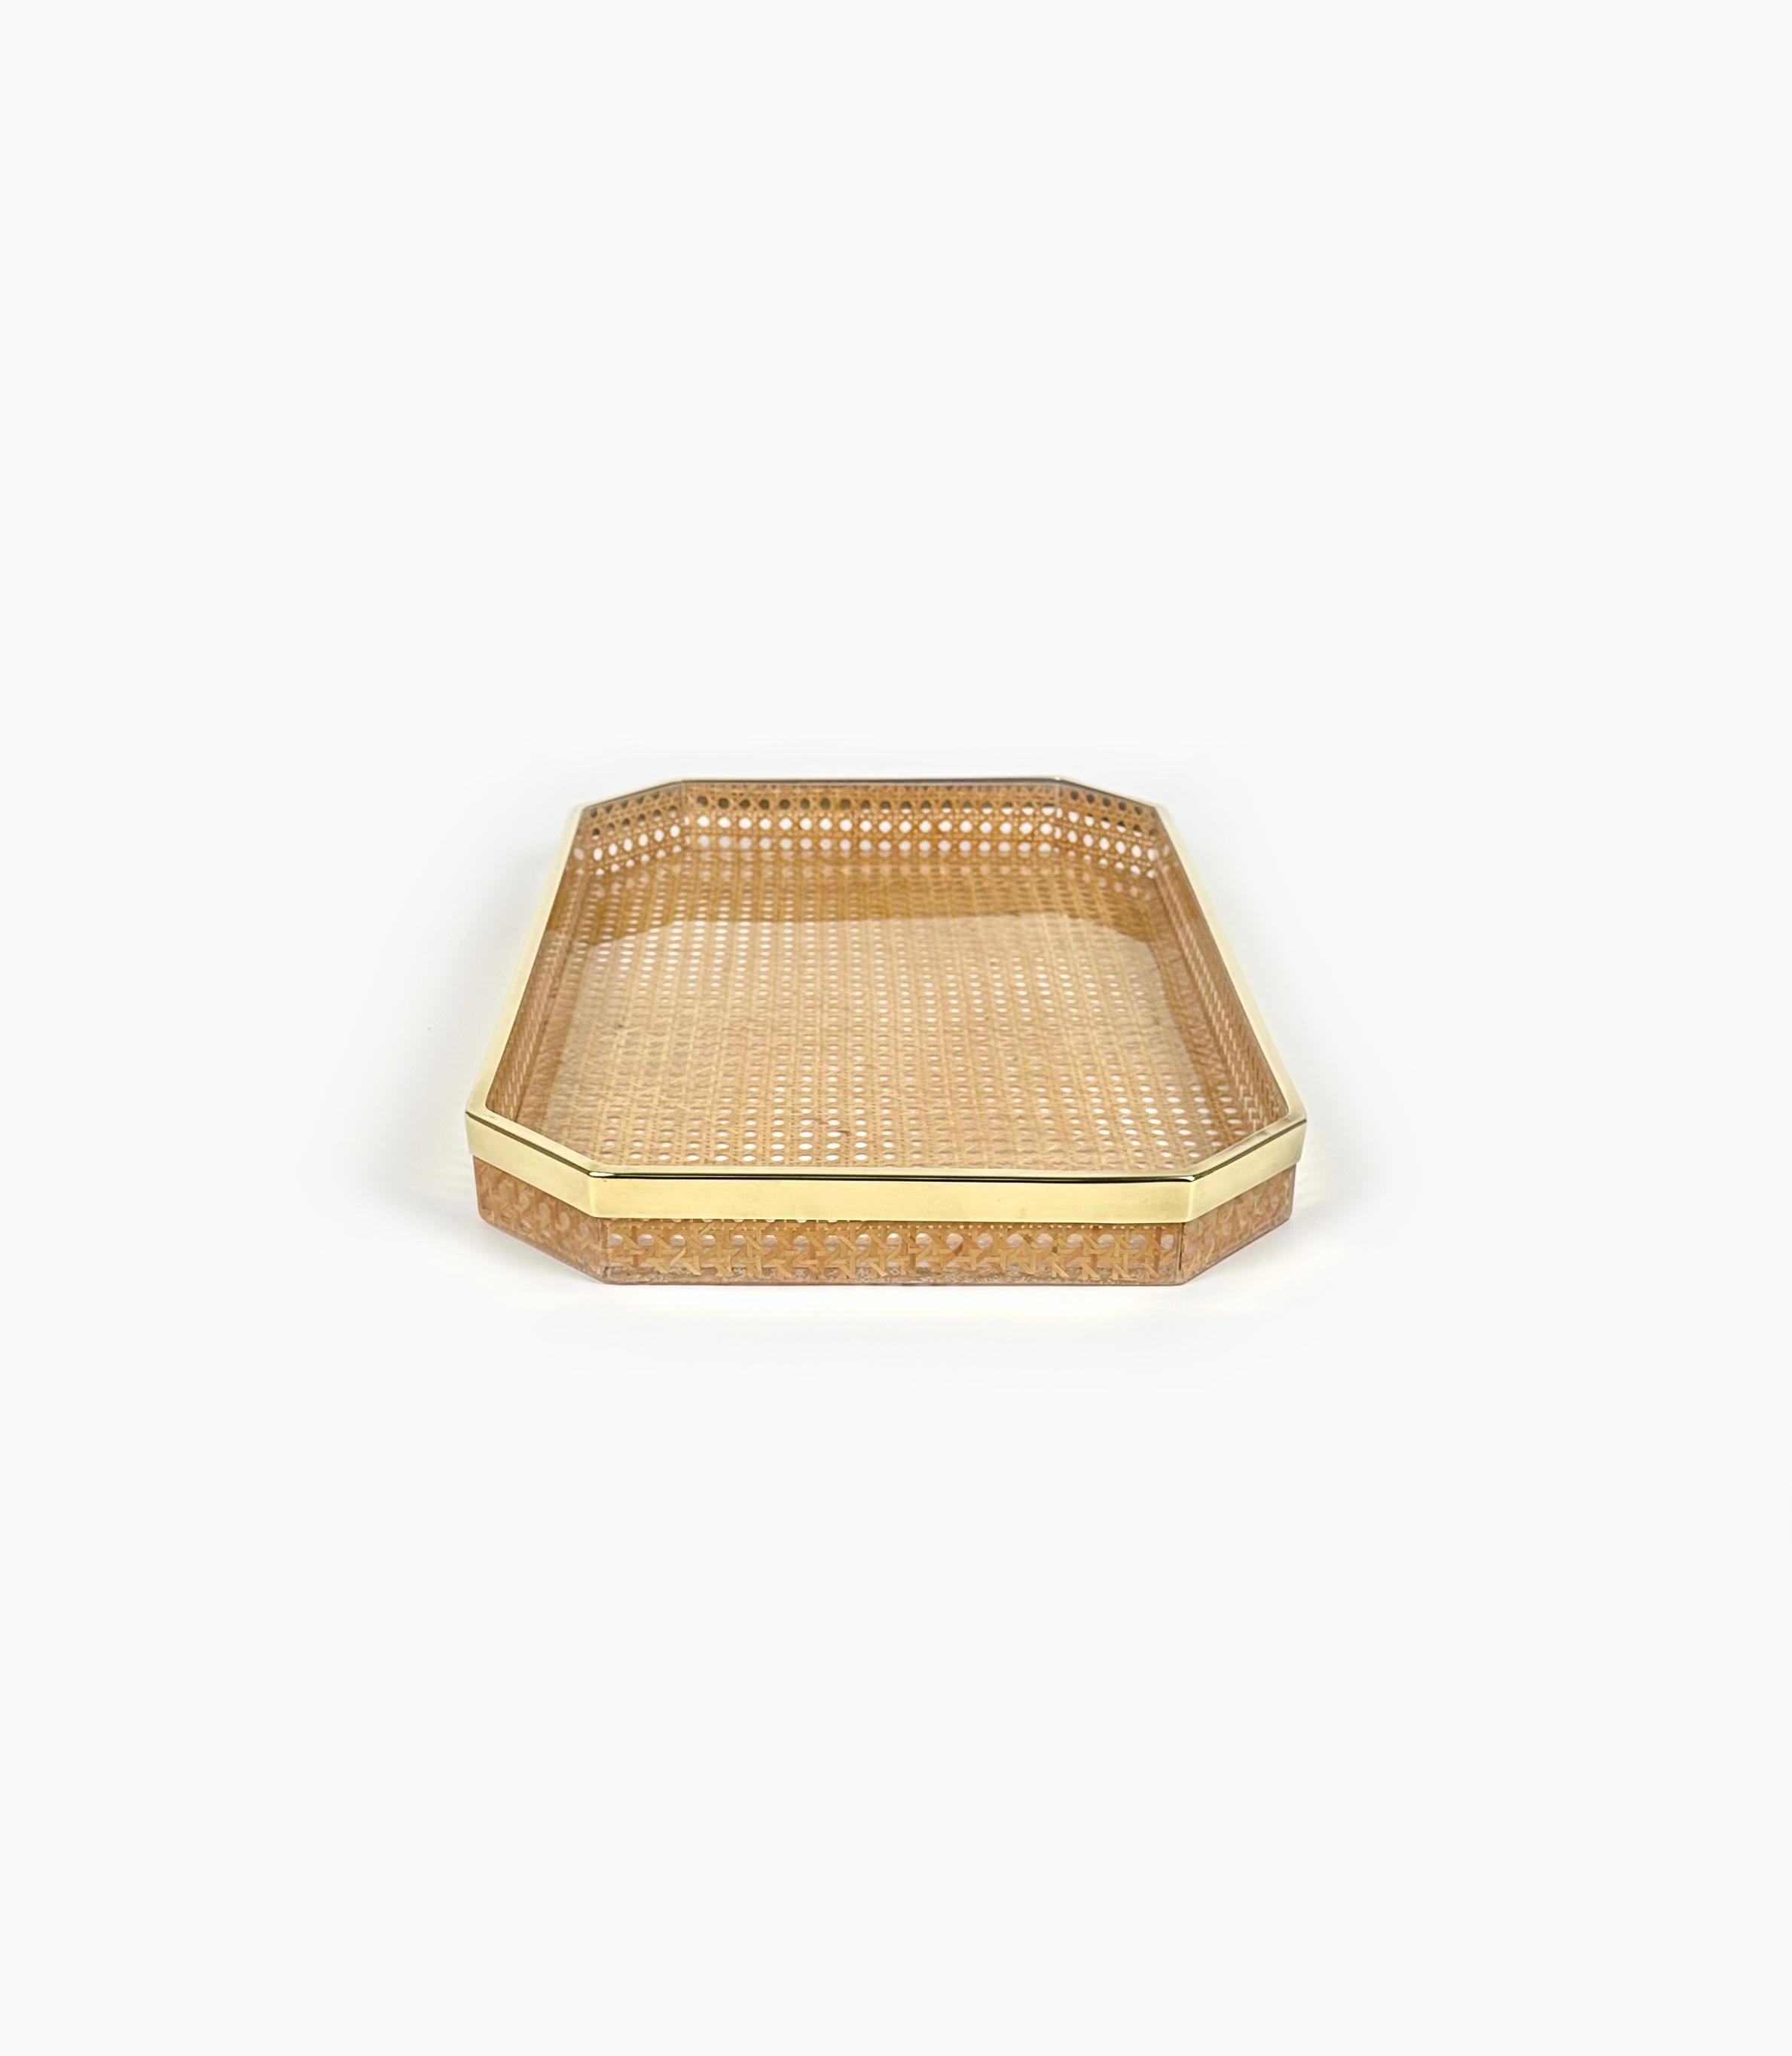 Metal Serving Tray in Lucite, Rattan and Brass Christian Dior Style, Italy, 1970s